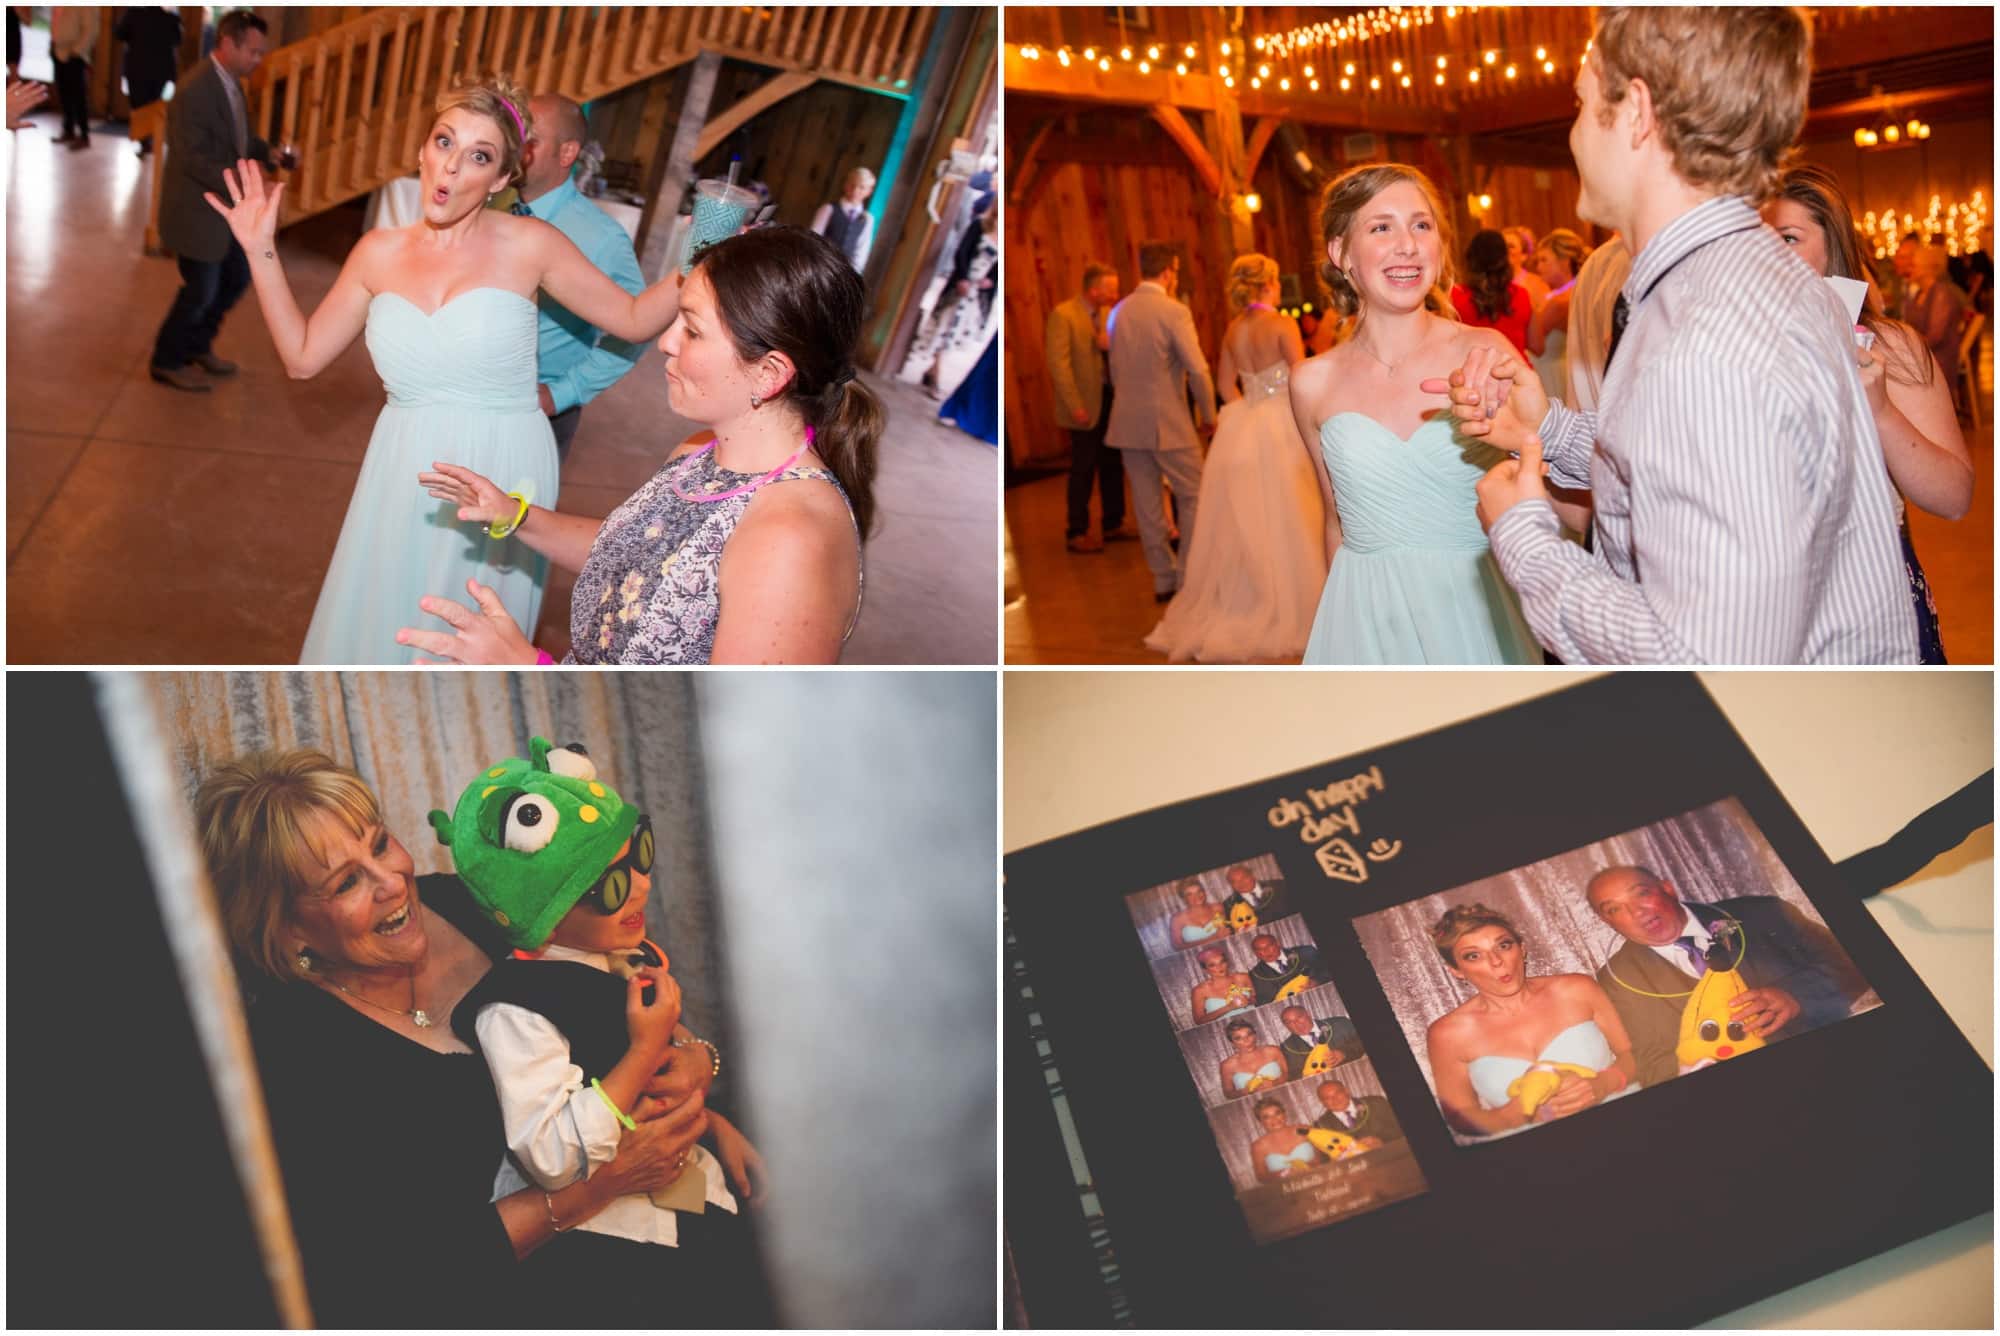 County Line Orchard Wedding Photographer fun party moments captured during dancing and at photo booth 